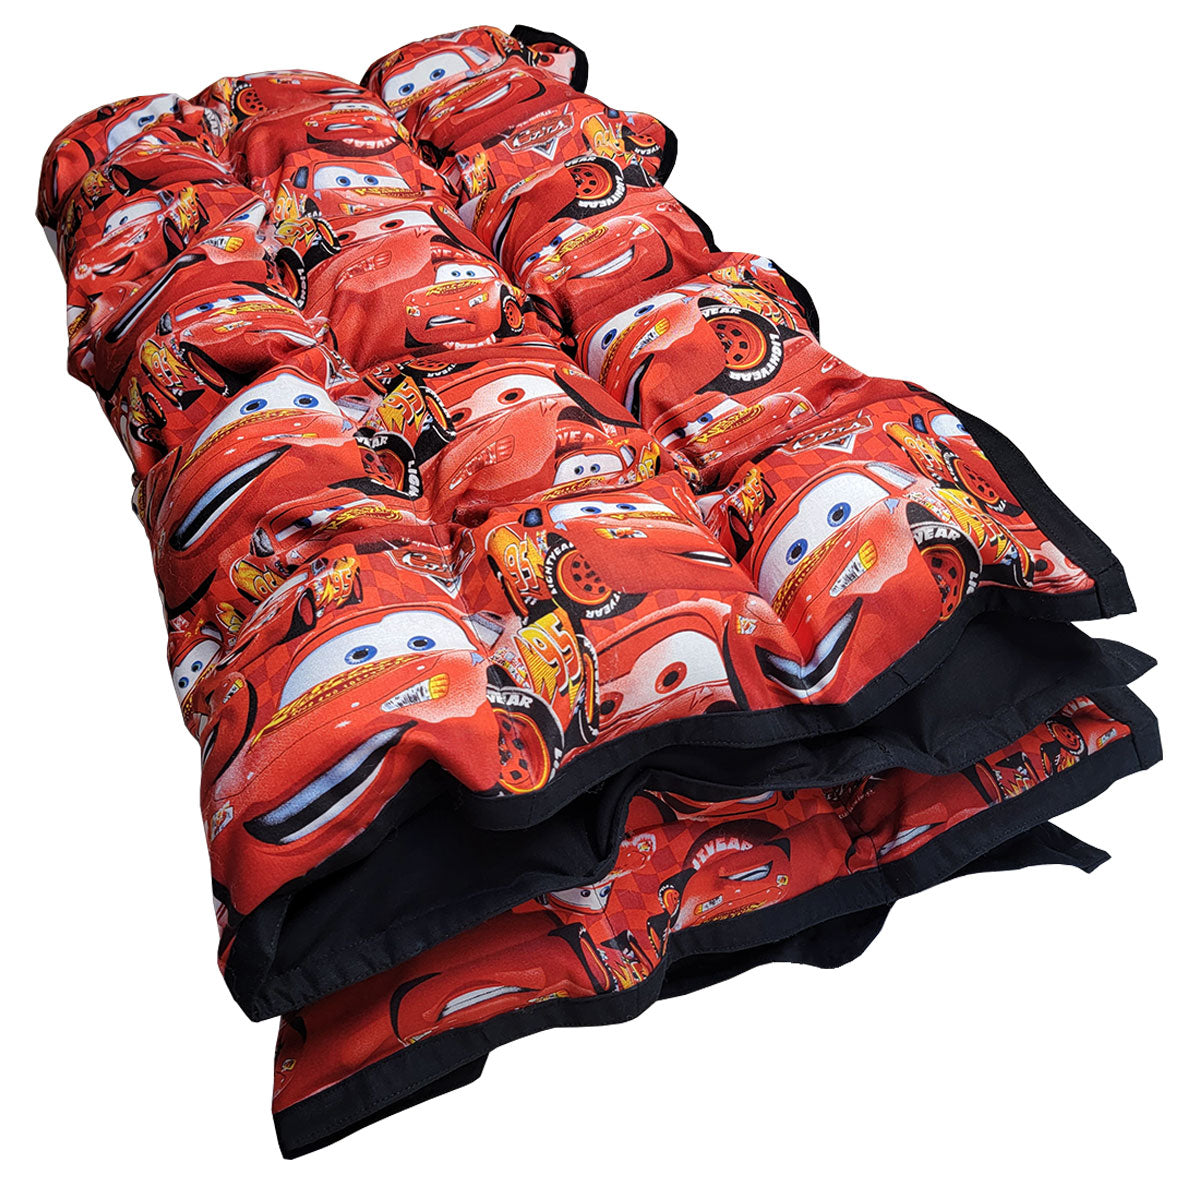 Clearance Weighted Blanket - Medium 8 lb Cars (for 60lb user)